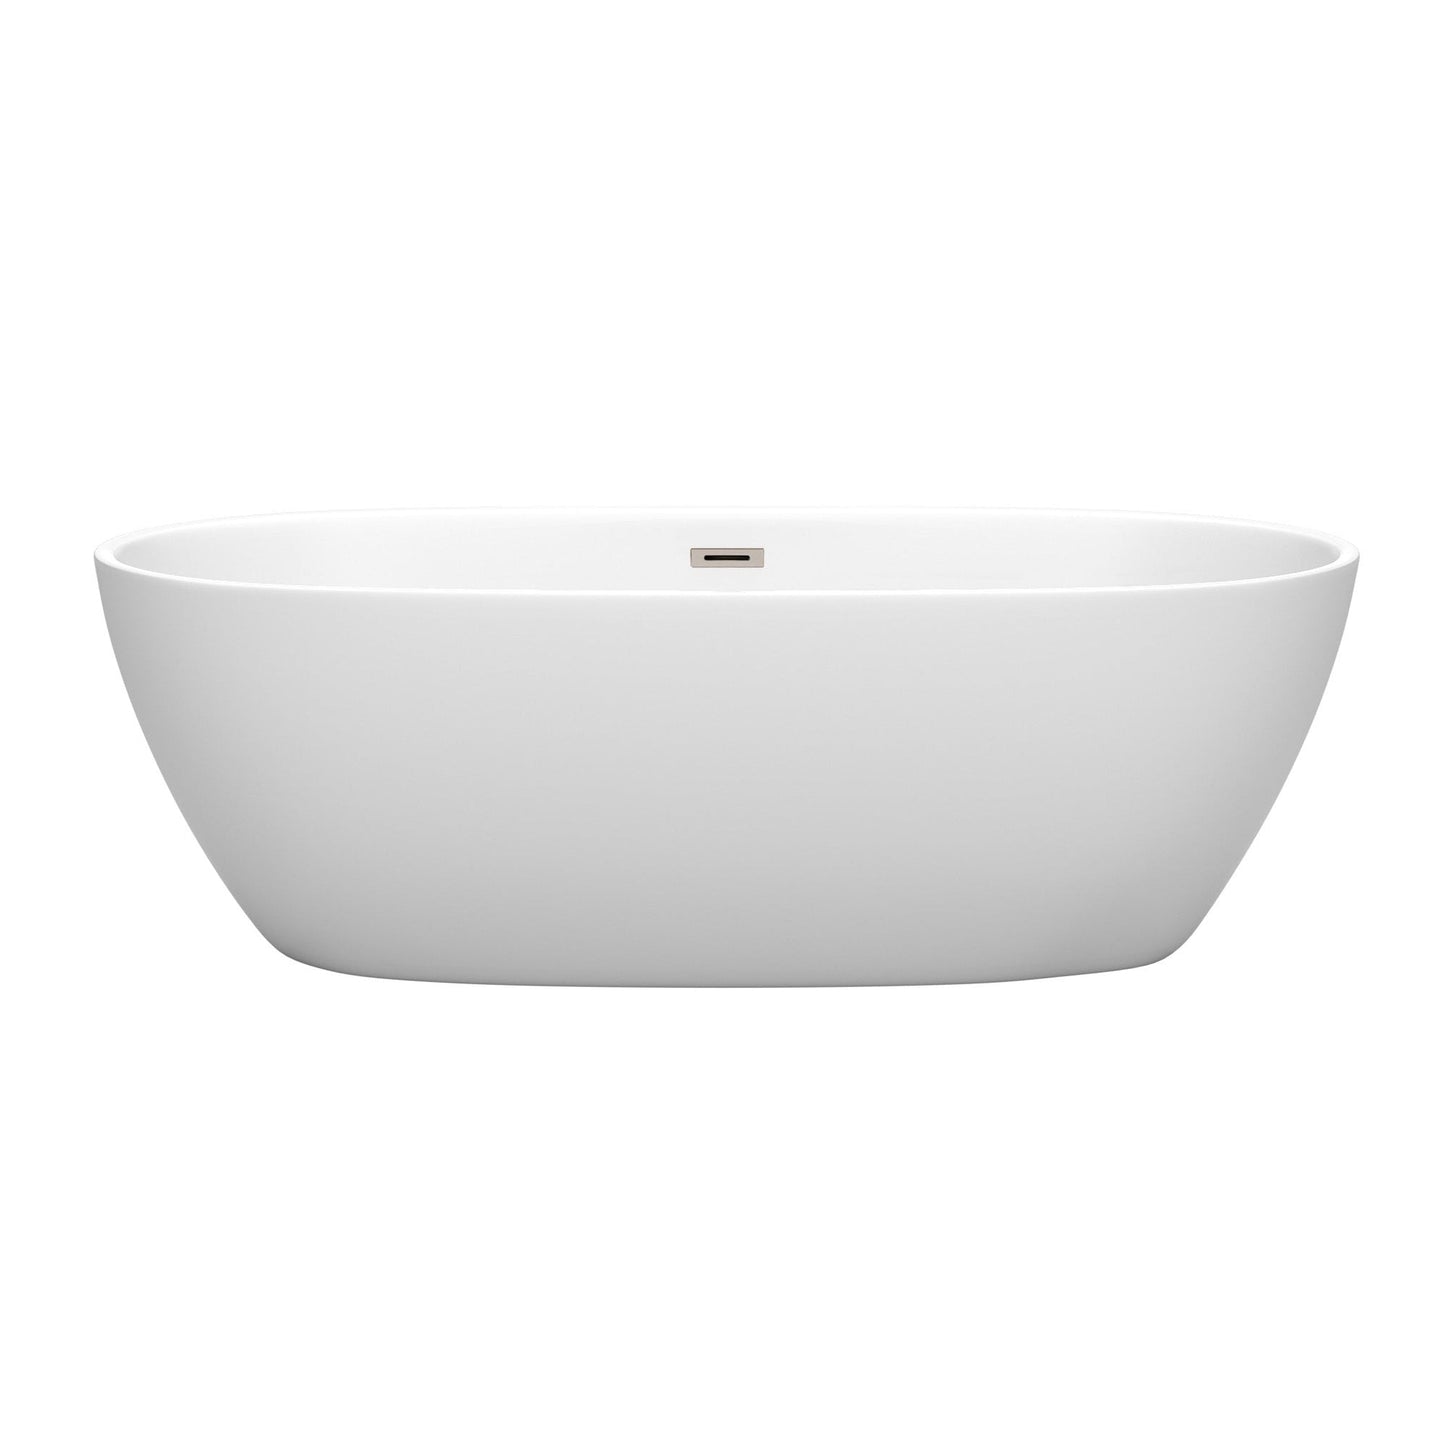 Wyndham Collection Juno 71" Freestanding Bathtub in Matte White With Brushed Nickel Drain and Overflow Trim